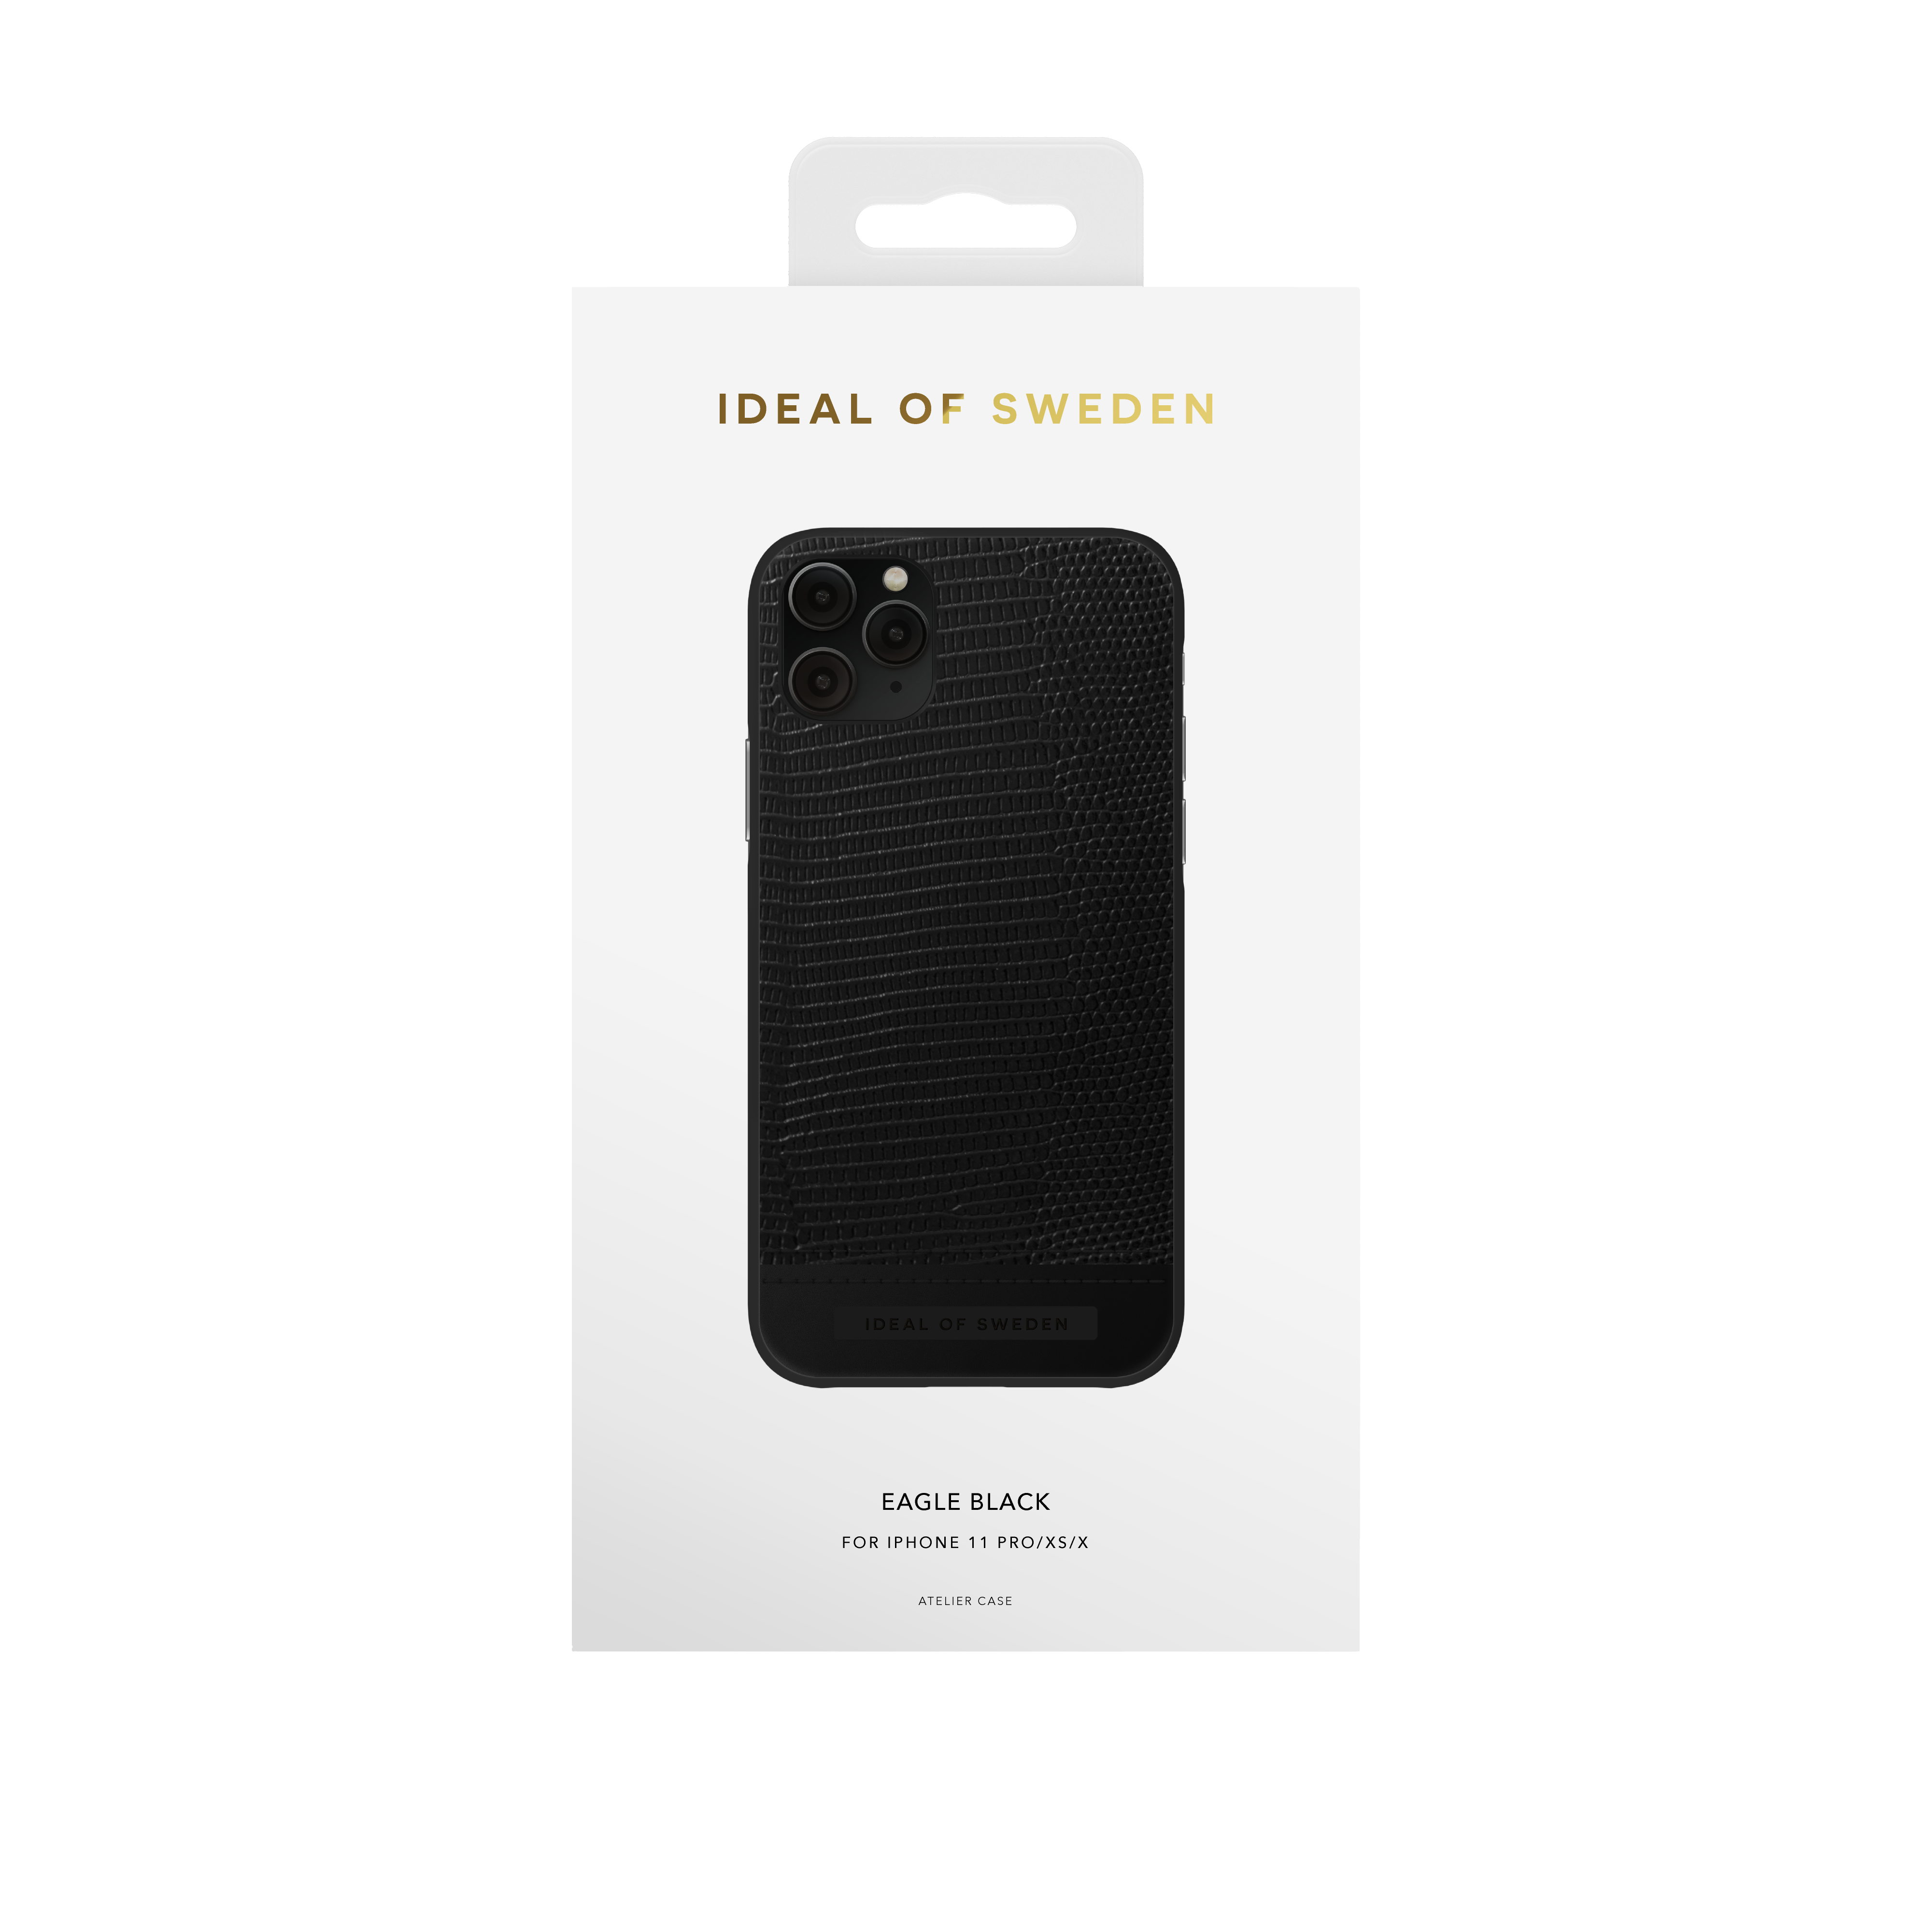 IDEAL OF SWEDEN IDACAW20-1958-229, Backcover, Apple, Eagle XS, iPhone iPhone Black X, 11 iPhone Pro